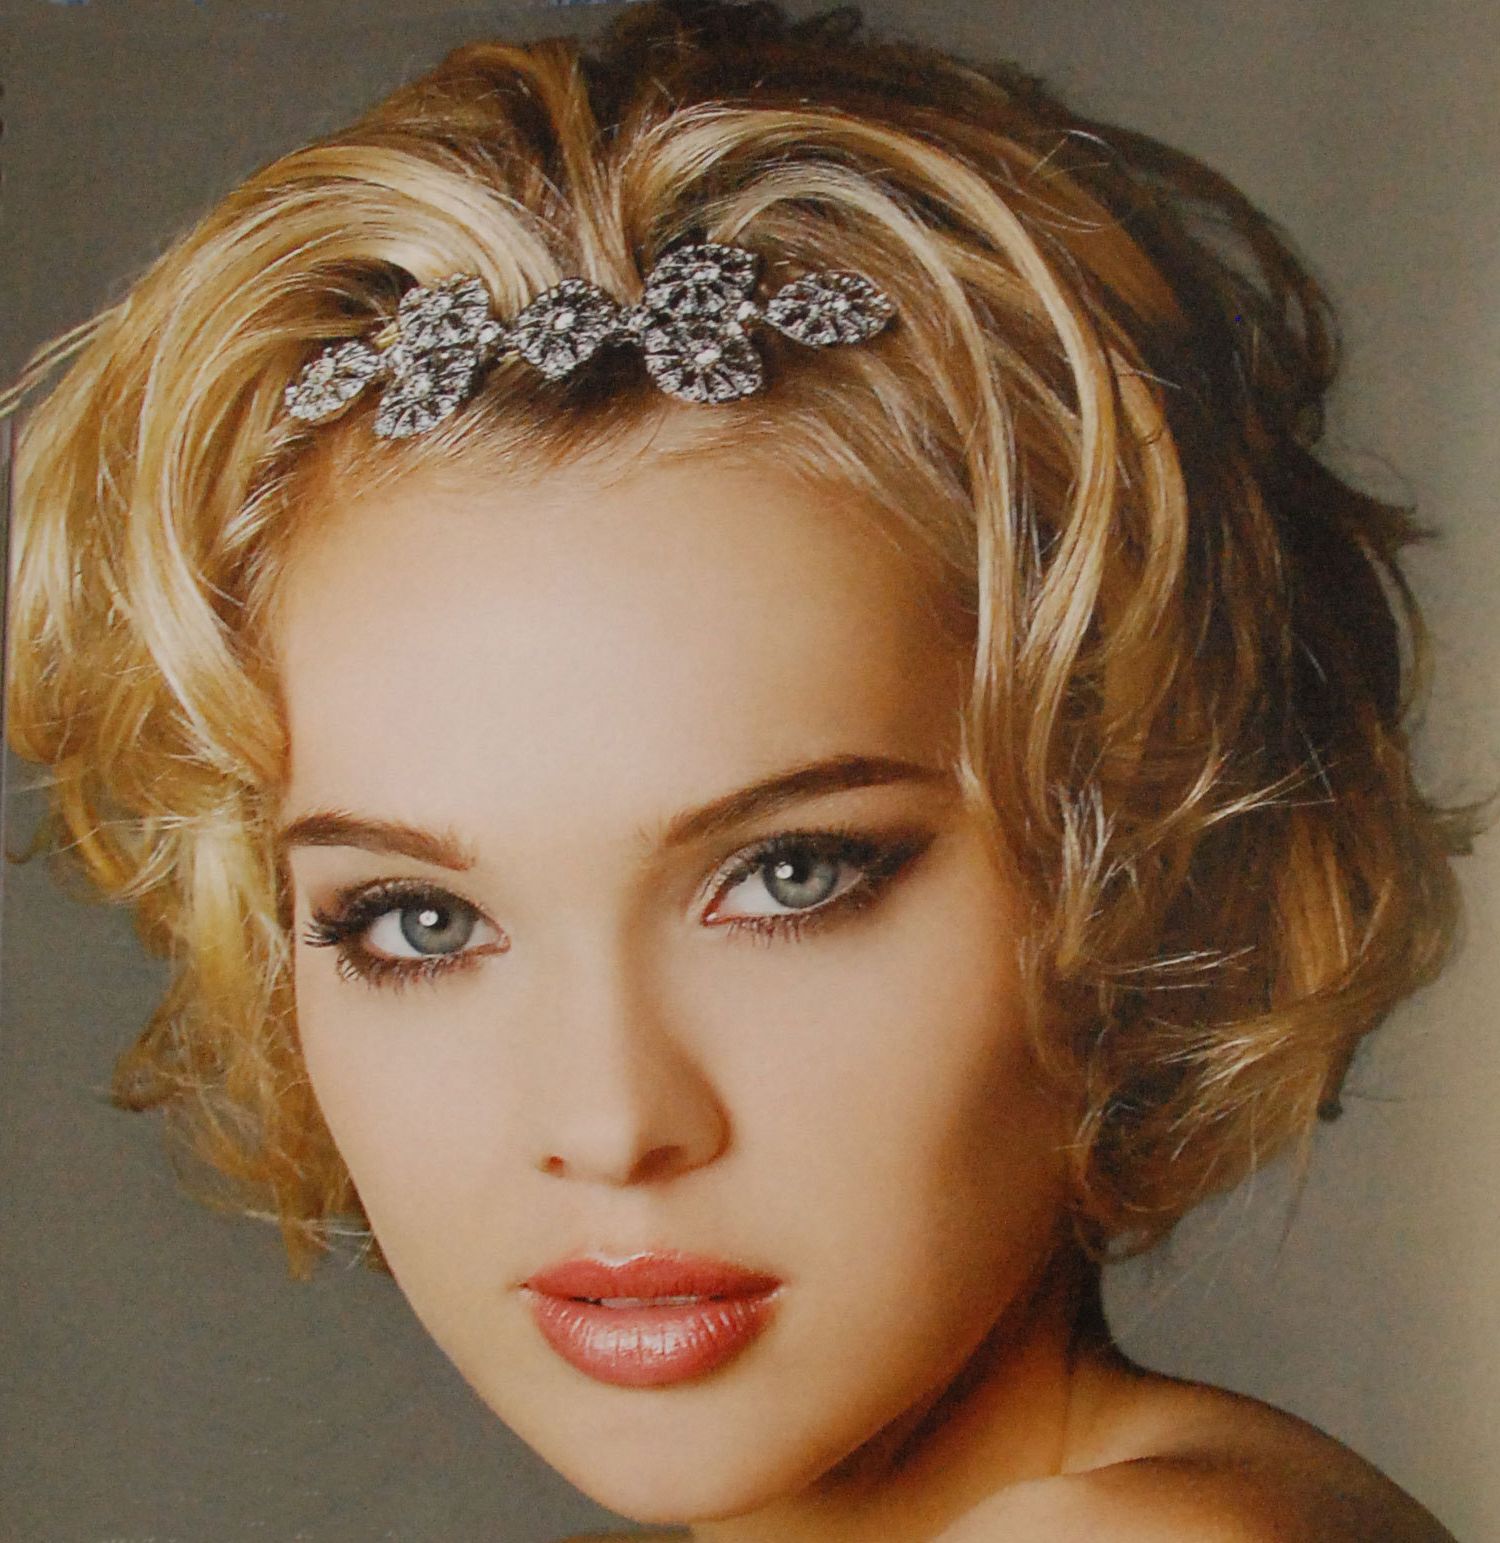 Wedding Hairstyle Short Hair | Cute Hairstyles Pertaining To Cute Wedding Hairstyles For Short Hair (View 13 of 25)